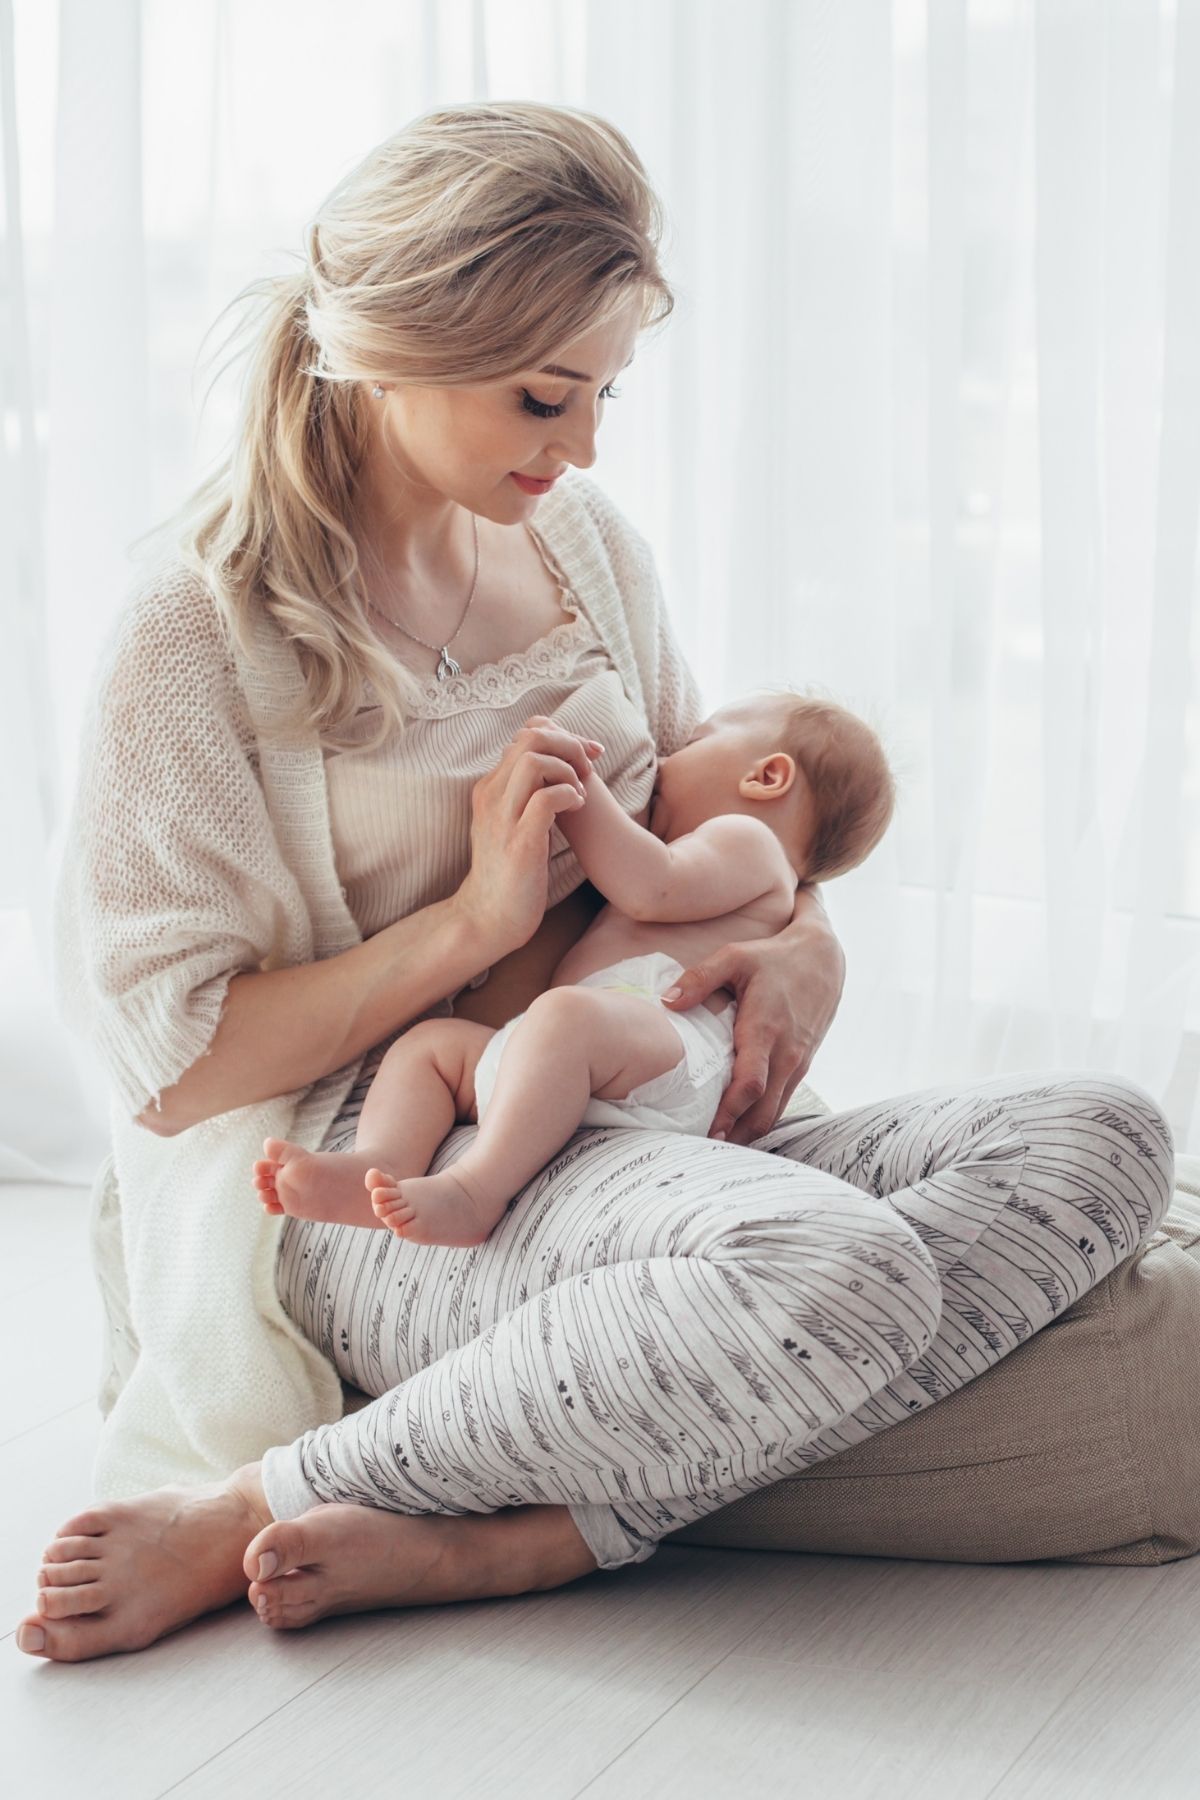 Blonde woman nurses her baby while sitting on a bean bag in front of window.